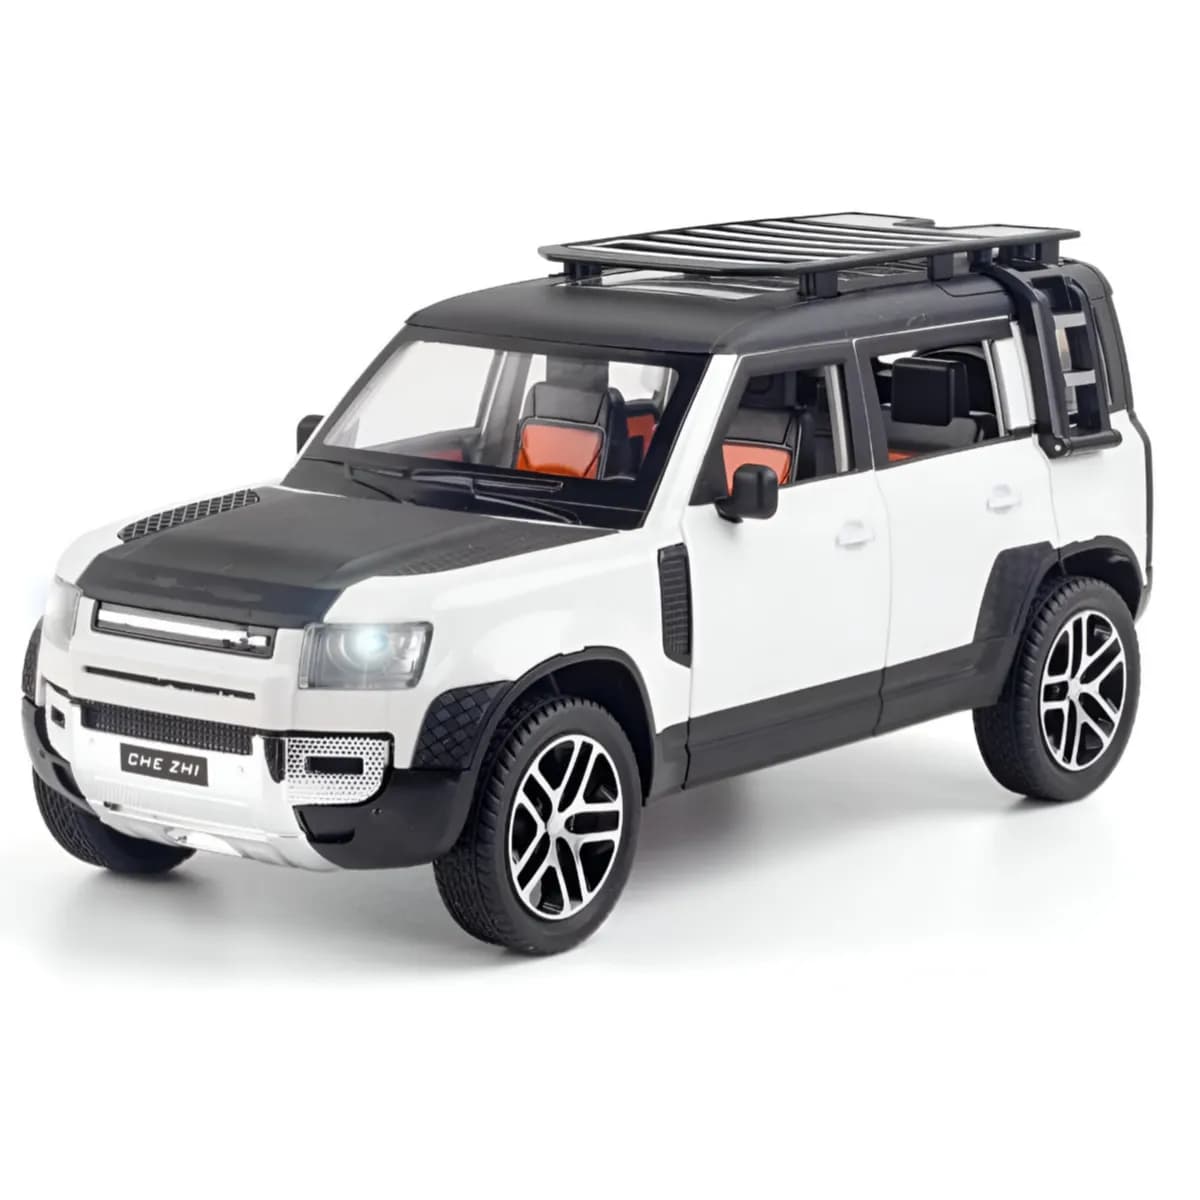 Land Rover-Defender AlloyDiecast Metal Collectible Car Simulation 1:24 Pull Back Function DCWD07